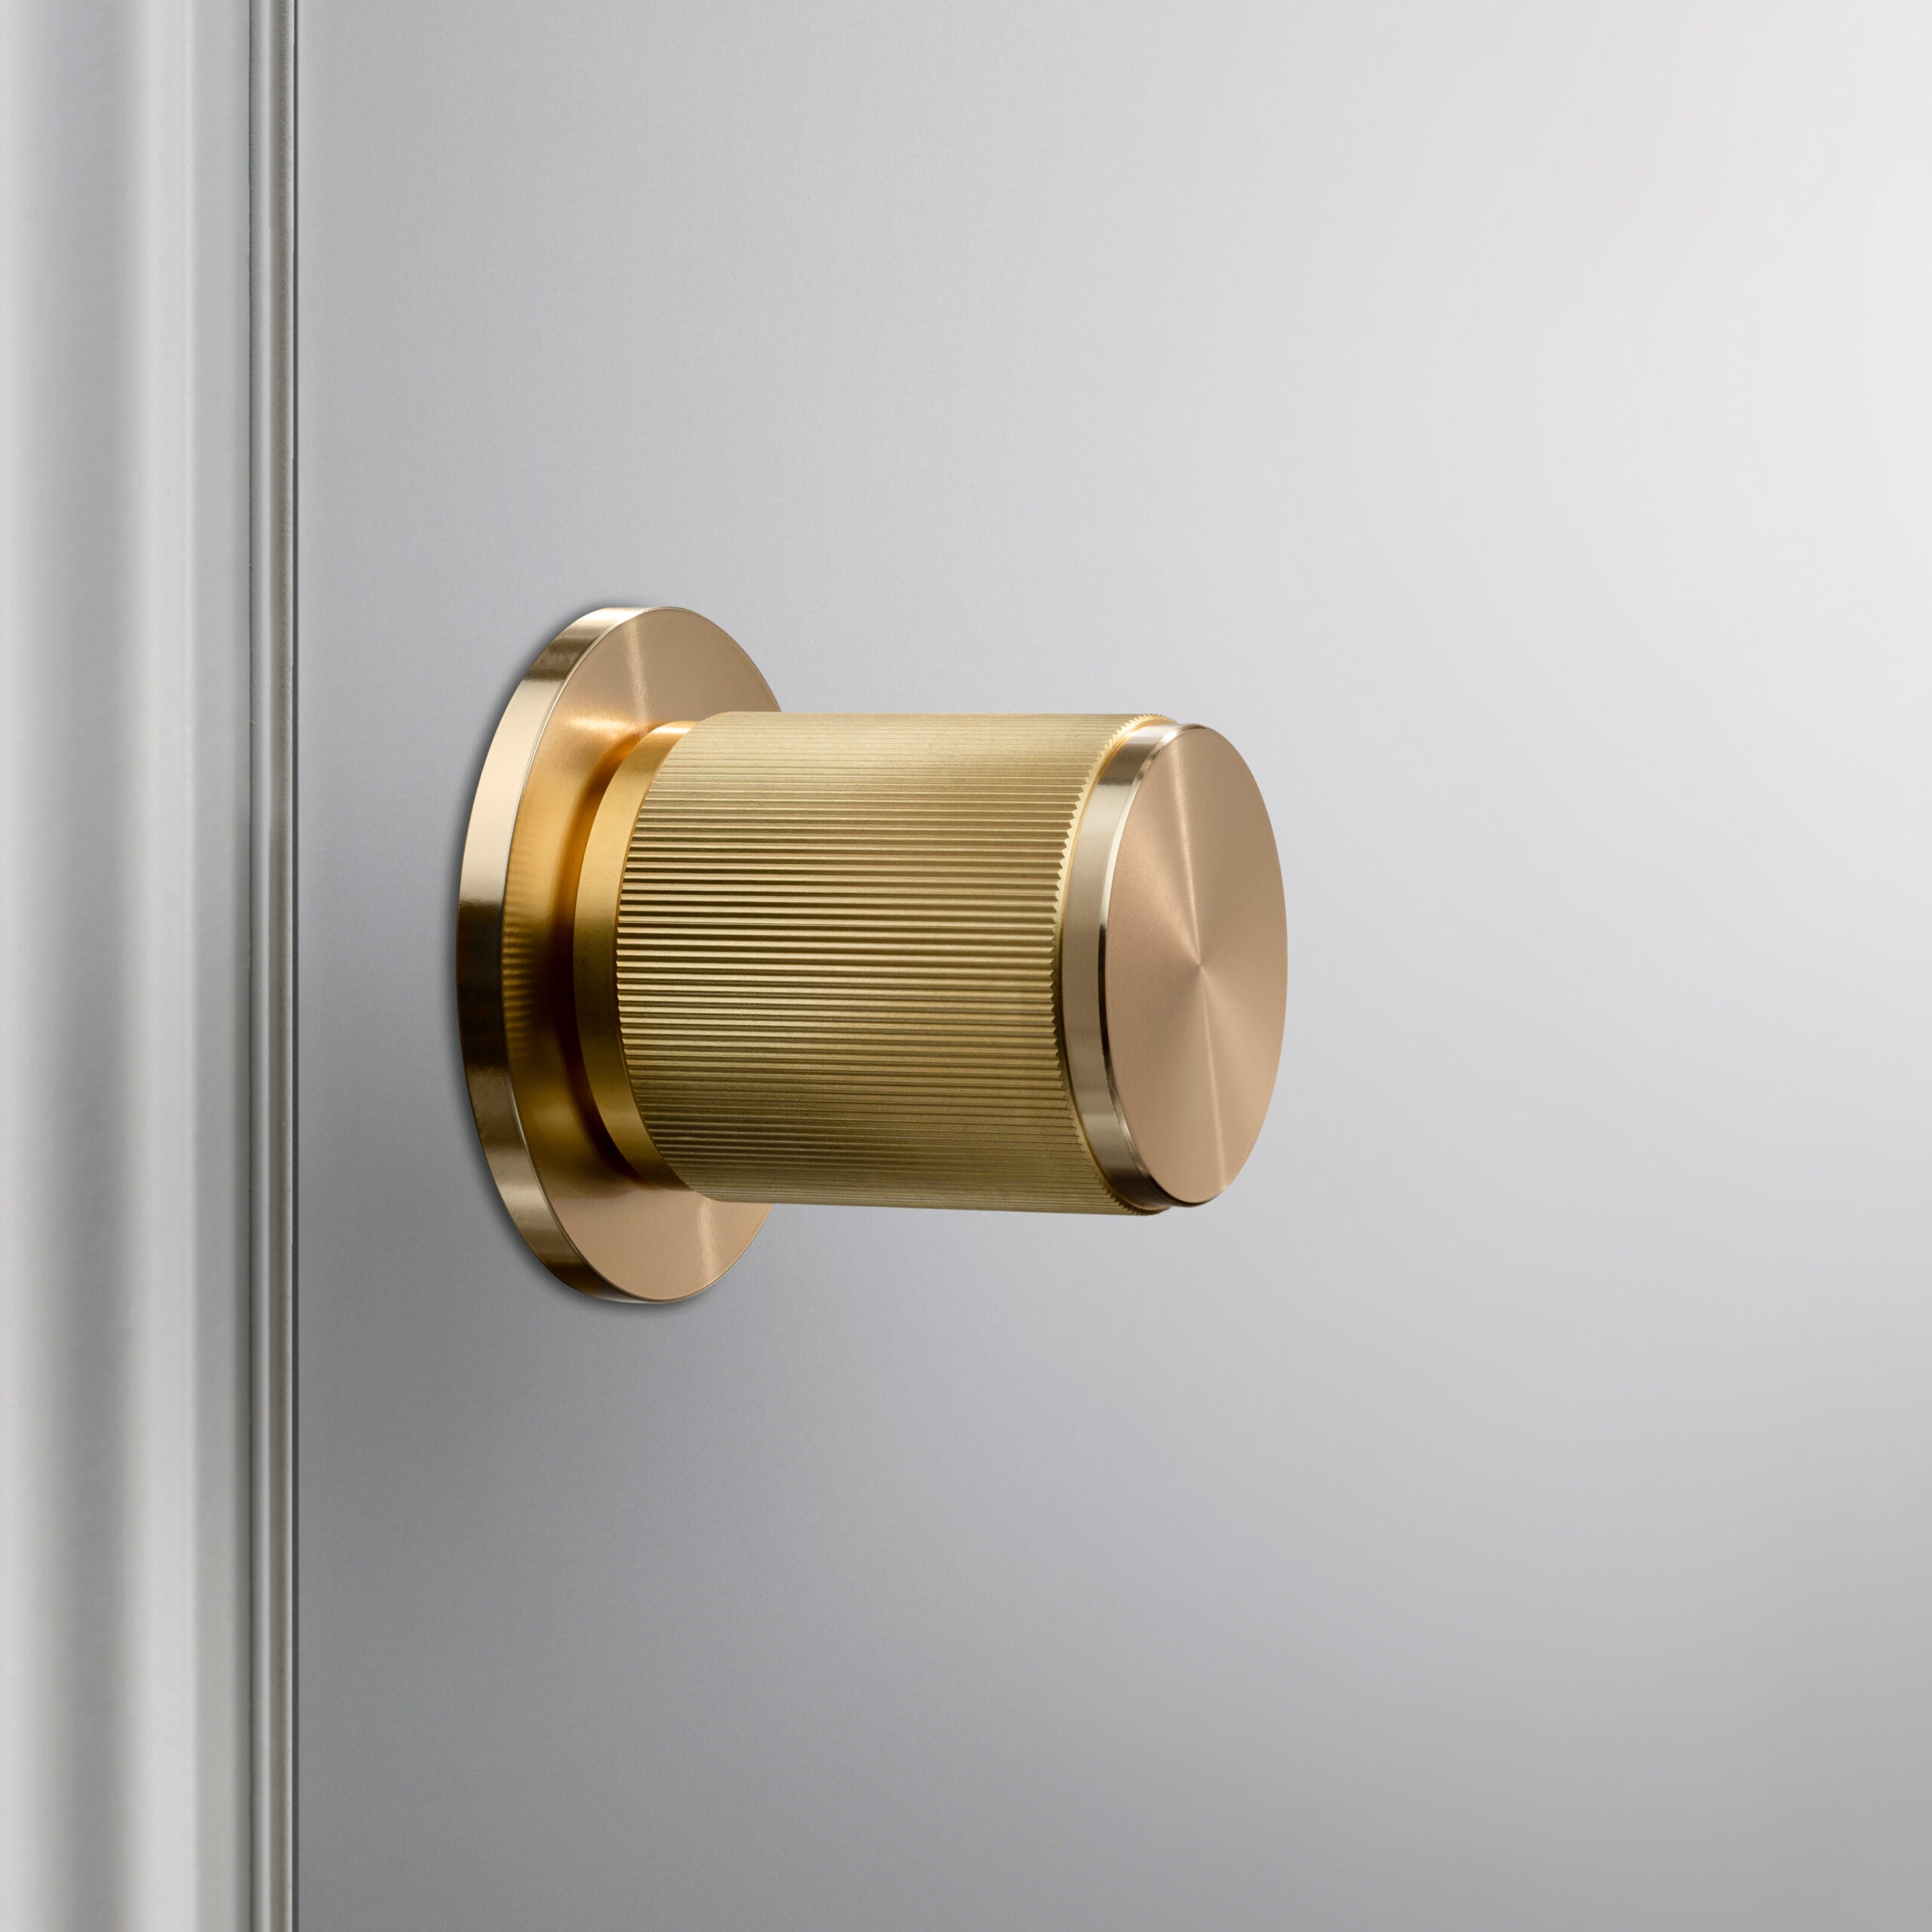 Buster + Punch Linear Fixed Single-Sided Door Knob - Color: Brass/Antique - NDK-051069